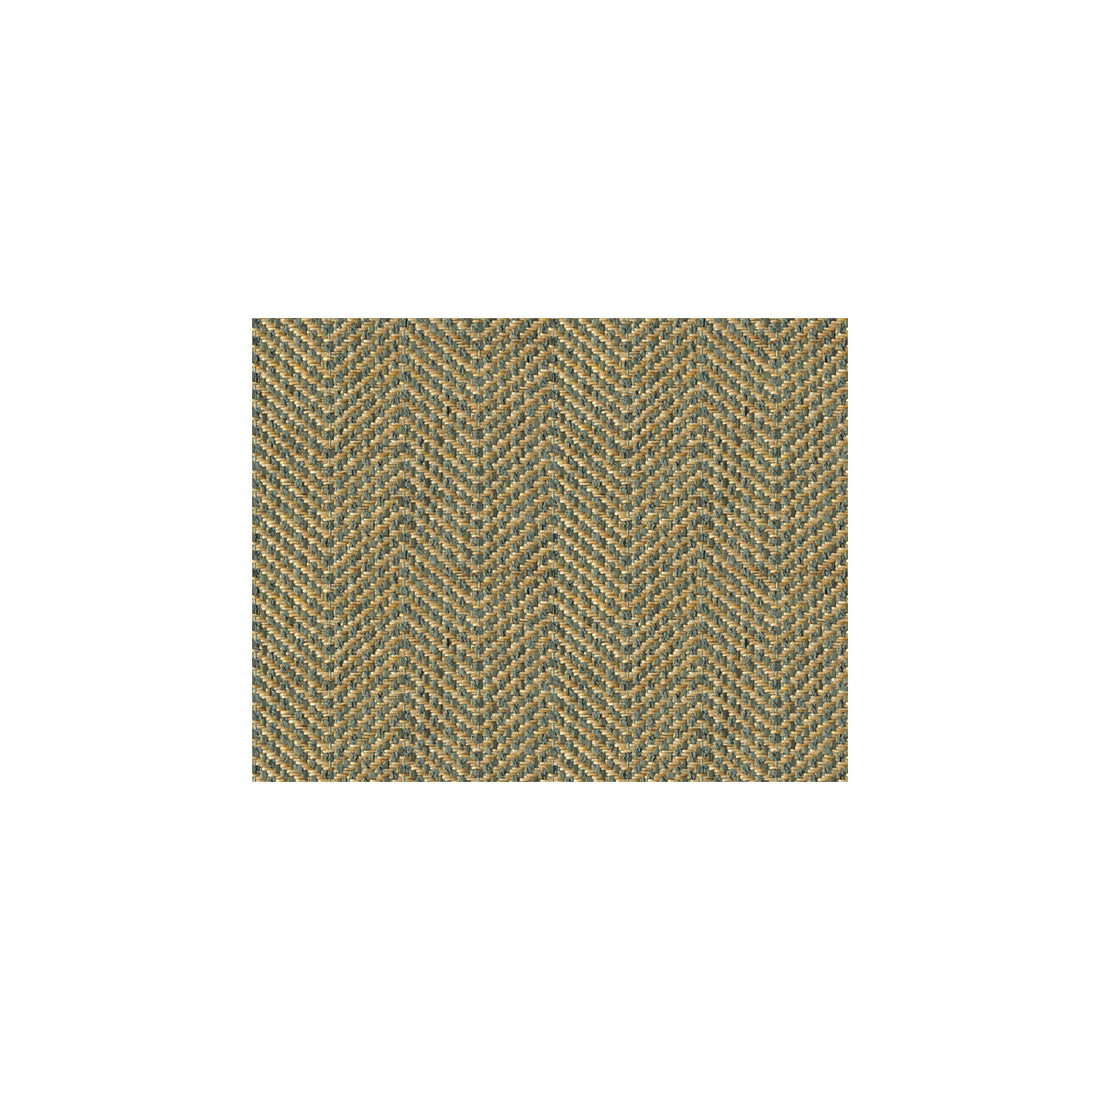 Kravet Contract fabric in 32018-1615 color - pattern 32018.1615.0 - by Kravet Contract